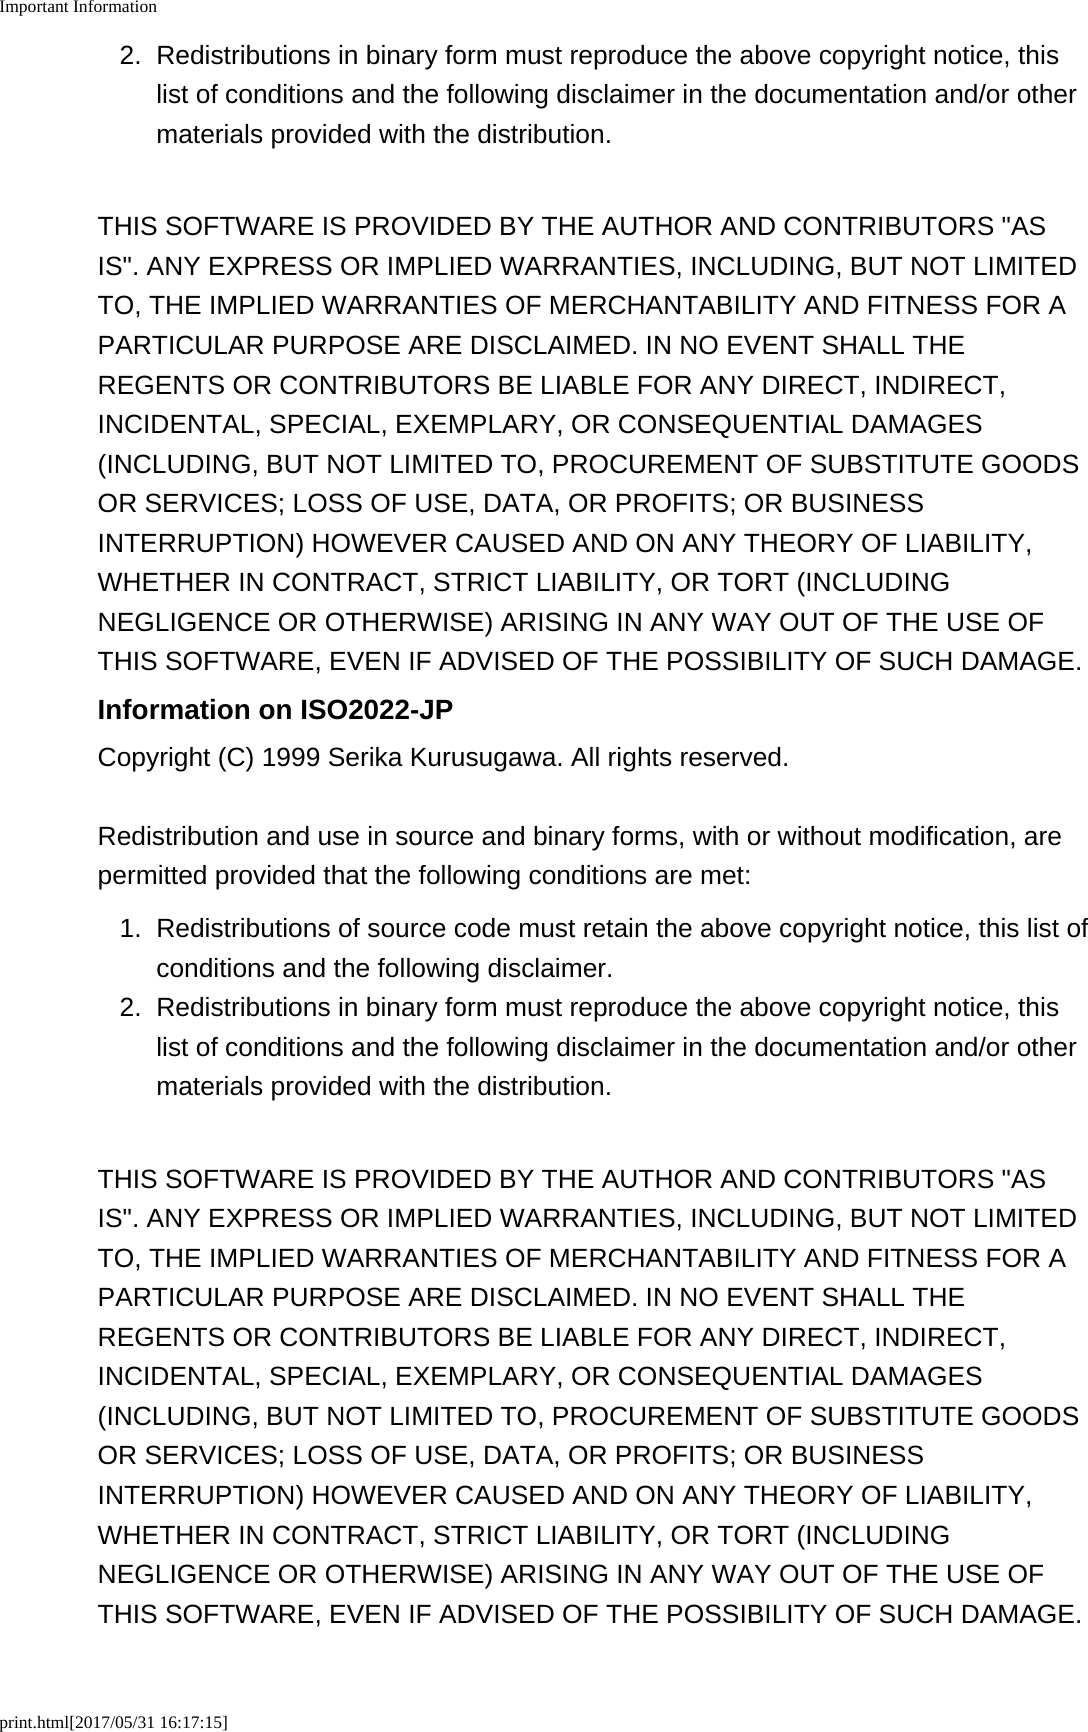 Important Informationprint.html[2017/05/31 16:17:15]2. Redistributions in binary form must reproduce the above copyright notice, thislist of conditions and the following disclaimer in the documentation and/or othermaterials provided with the distribution.THIS SOFTWARE IS PROVIDED BY THE AUTHOR AND CONTRIBUTORS &quot;ASIS&quot;. ANY EXPRESS OR IMPLIED WARRANTIES, INCLUDING, BUT NOT LIMITEDTO, THE IMPLIED WARRANTIES OF MERCHANTABILITY AND FITNESS FOR APARTICULAR PURPOSE ARE DISCLAIMED. IN NO EVENT SHALL THEREGENTS OR CONTRIBUTORS BE LIABLE FOR ANY DIRECT, INDIRECT,INCIDENTAL, SPECIAL, EXEMPLARY, OR CONSEQUENTIAL DAMAGES(INCLUDING, BUT NOT LIMITED TO, PROCUREMENT OF SUBSTITUTE GOODSOR SERVICES; LOSS OF USE, DATA, OR PROFITS; OR BUSINESSINTERRUPTION) HOWEVER CAUSED AND ON ANY THEORY OF LIABILITY,WHETHER IN CONTRACT, STRICT LIABILITY, OR TORT (INCLUDINGNEGLIGENCE OR OTHERWISE) ARISING IN ANY WAY OUT OF THE USE OFTHIS SOFTWARE, EVEN IF ADVISED OF THE POSSIBILITY OF SUCH DAMAGE.Information on ISO2022-JPCopyright (C) 1999 Serika Kurusugawa. All rights reserved.Redistribution and use in source and binary forms, with or without modification, arepermitted provided that the following conditions are met:1. Redistributions of source code must retain the above copyright notice, this list ofconditions and the following disclaimer.2.Redistributions in binary form must reproduce the above copyright notice, thislist of conditions and the following disclaimer in the documentation and/or othermaterials provided with the distribution.THIS SOFTWARE IS PROVIDED BY THE AUTHOR AND CONTRIBUTORS &quot;ASIS&quot;. ANY EXPRESS OR IMPLIED WARRANTIES, INCLUDING, BUT NOT LIMITEDTO, THE IMPLIED WARRANTIES OF MERCHANTABILITY AND FITNESS FOR APARTICULAR PURPOSE ARE DISCLAIMED. IN NO EVENT SHALL THEREGENTS OR CONTRIBUTORS BE LIABLE FOR ANY DIRECT, INDIRECT,INCIDENTAL, SPECIAL, EXEMPLARY, OR CONSEQUENTIAL DAMAGES(INCLUDING, BUT NOT LIMITED TO, PROCUREMENT OF SUBSTITUTE GOODSOR SERVICES; LOSS OF USE, DATA, OR PROFITS; OR BUSINESSINTERRUPTION) HOWEVER CAUSED AND ON ANY THEORY OF LIABILITY,WHETHER IN CONTRACT, STRICT LIABILITY, OR TORT (INCLUDINGNEGLIGENCE OR OTHERWISE) ARISING IN ANY WAY OUT OF THE USE OFTHIS SOFTWARE, EVEN IF ADVISED OF THE POSSIBILITY OF SUCH DAMAGE.